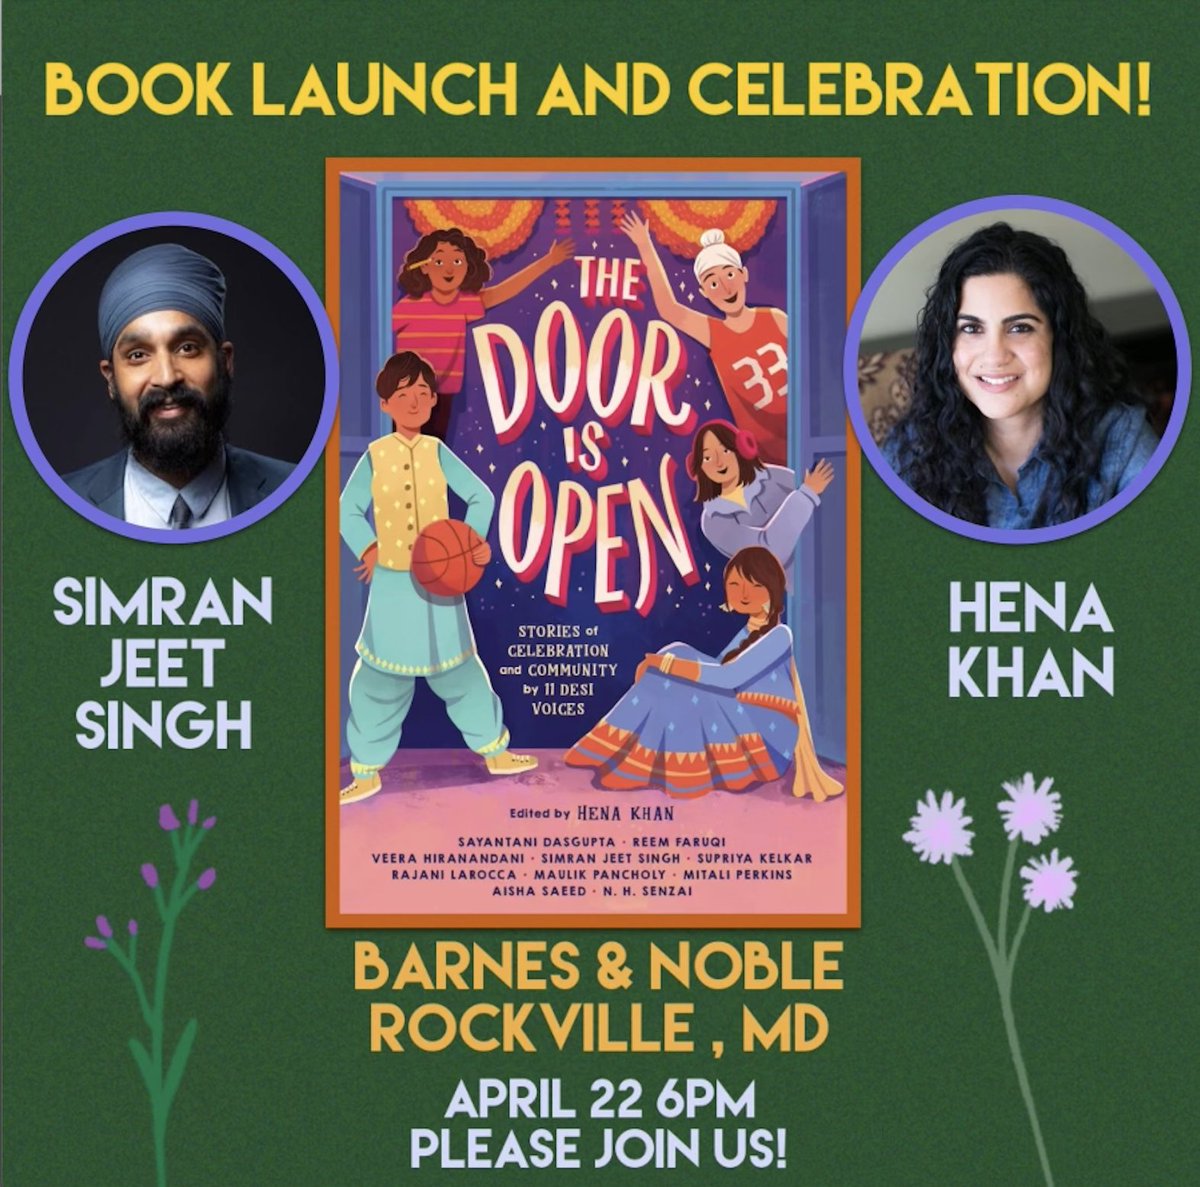 Hena Khan has an exciting new anthology for our kiddos, and I'm glad to have a fun short story in it. If you're around DC, come out to our launch event on April 22. We'd love to see you there — and I'll help ensure Hena signs your books! stores.barnesandnoble.com/event/97800621…